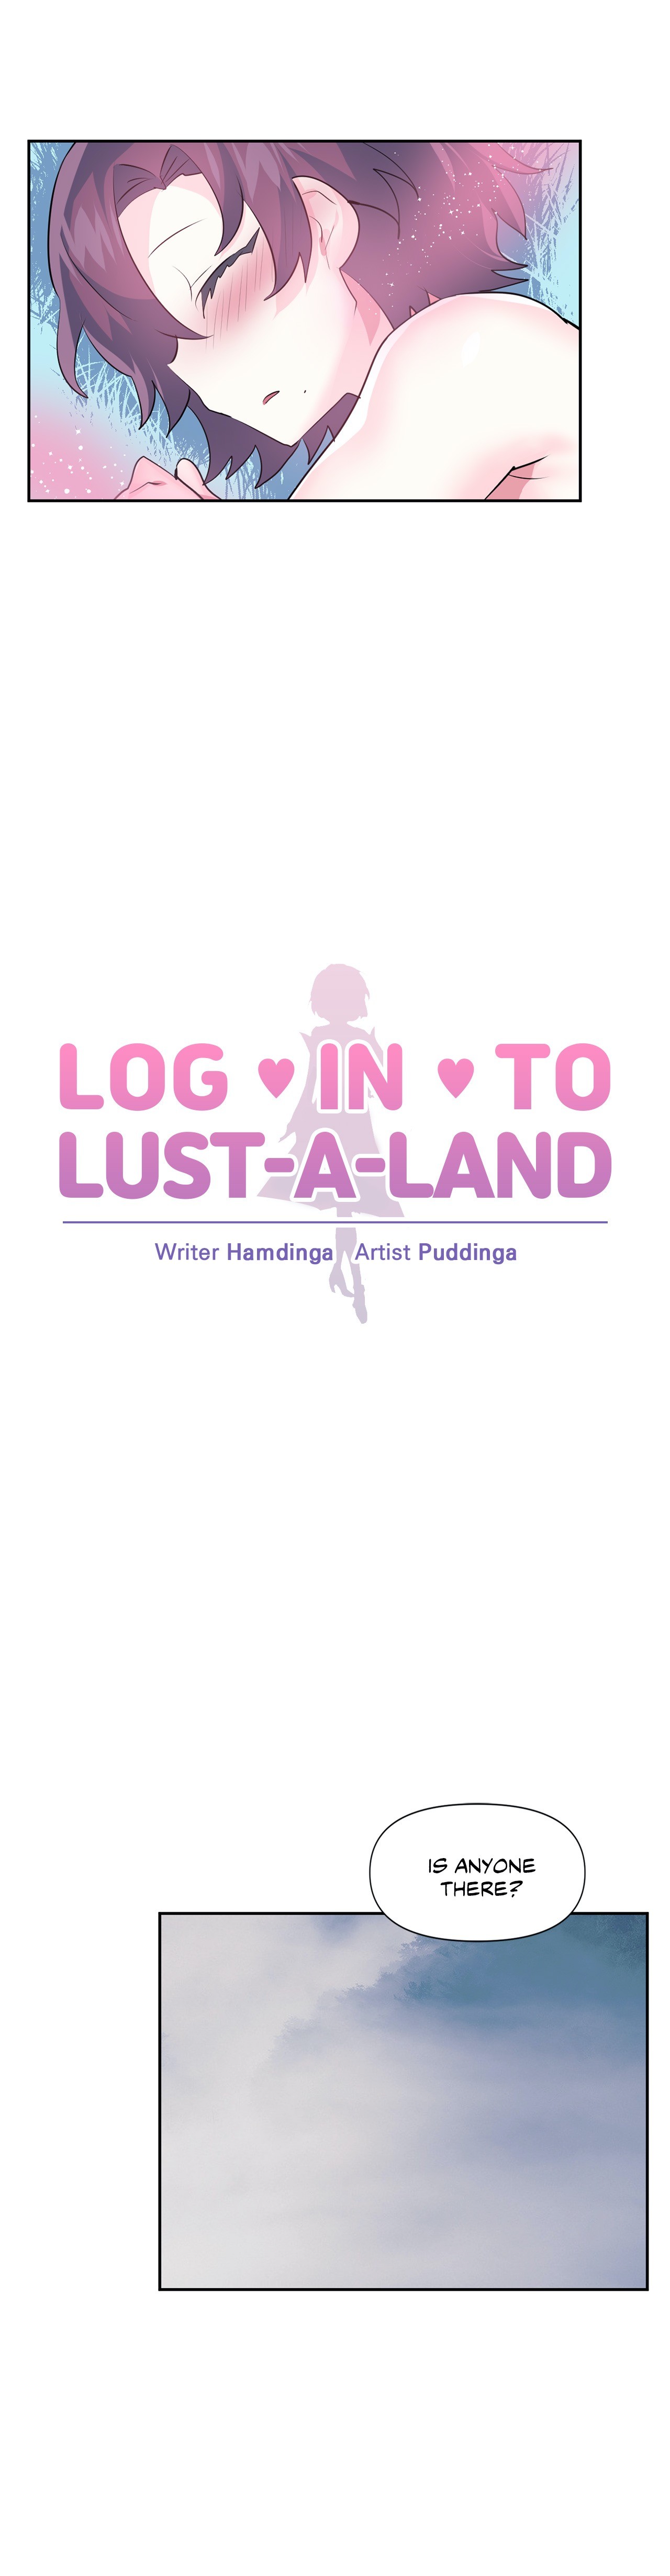 Log in to Lust-a-land image